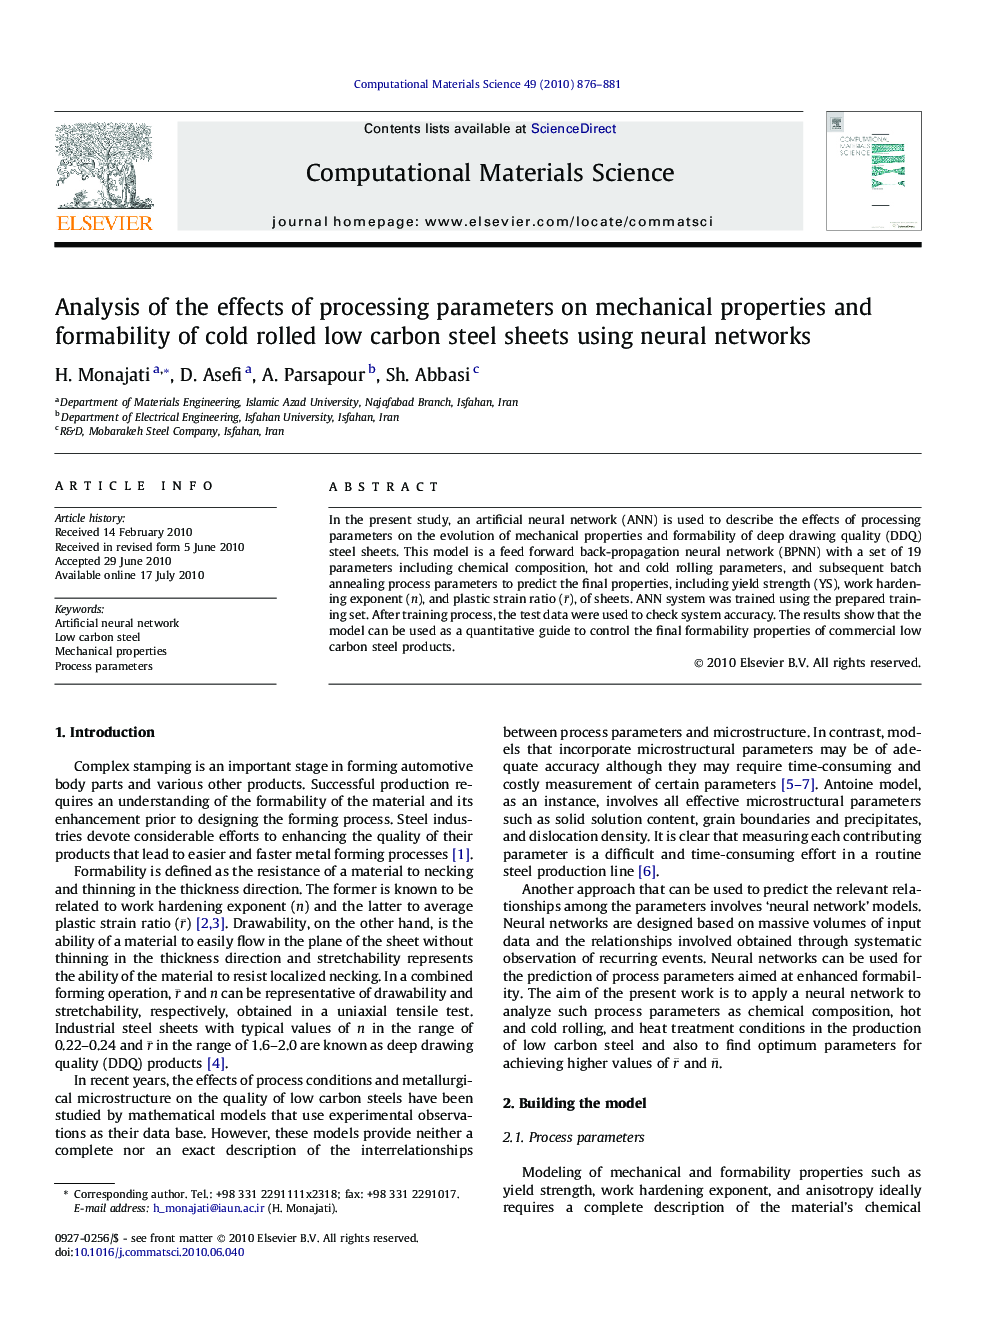 Analysis of the effects of processing parameters on mechanical properties and formability of cold rolled low carbon steel sheets using neural networks